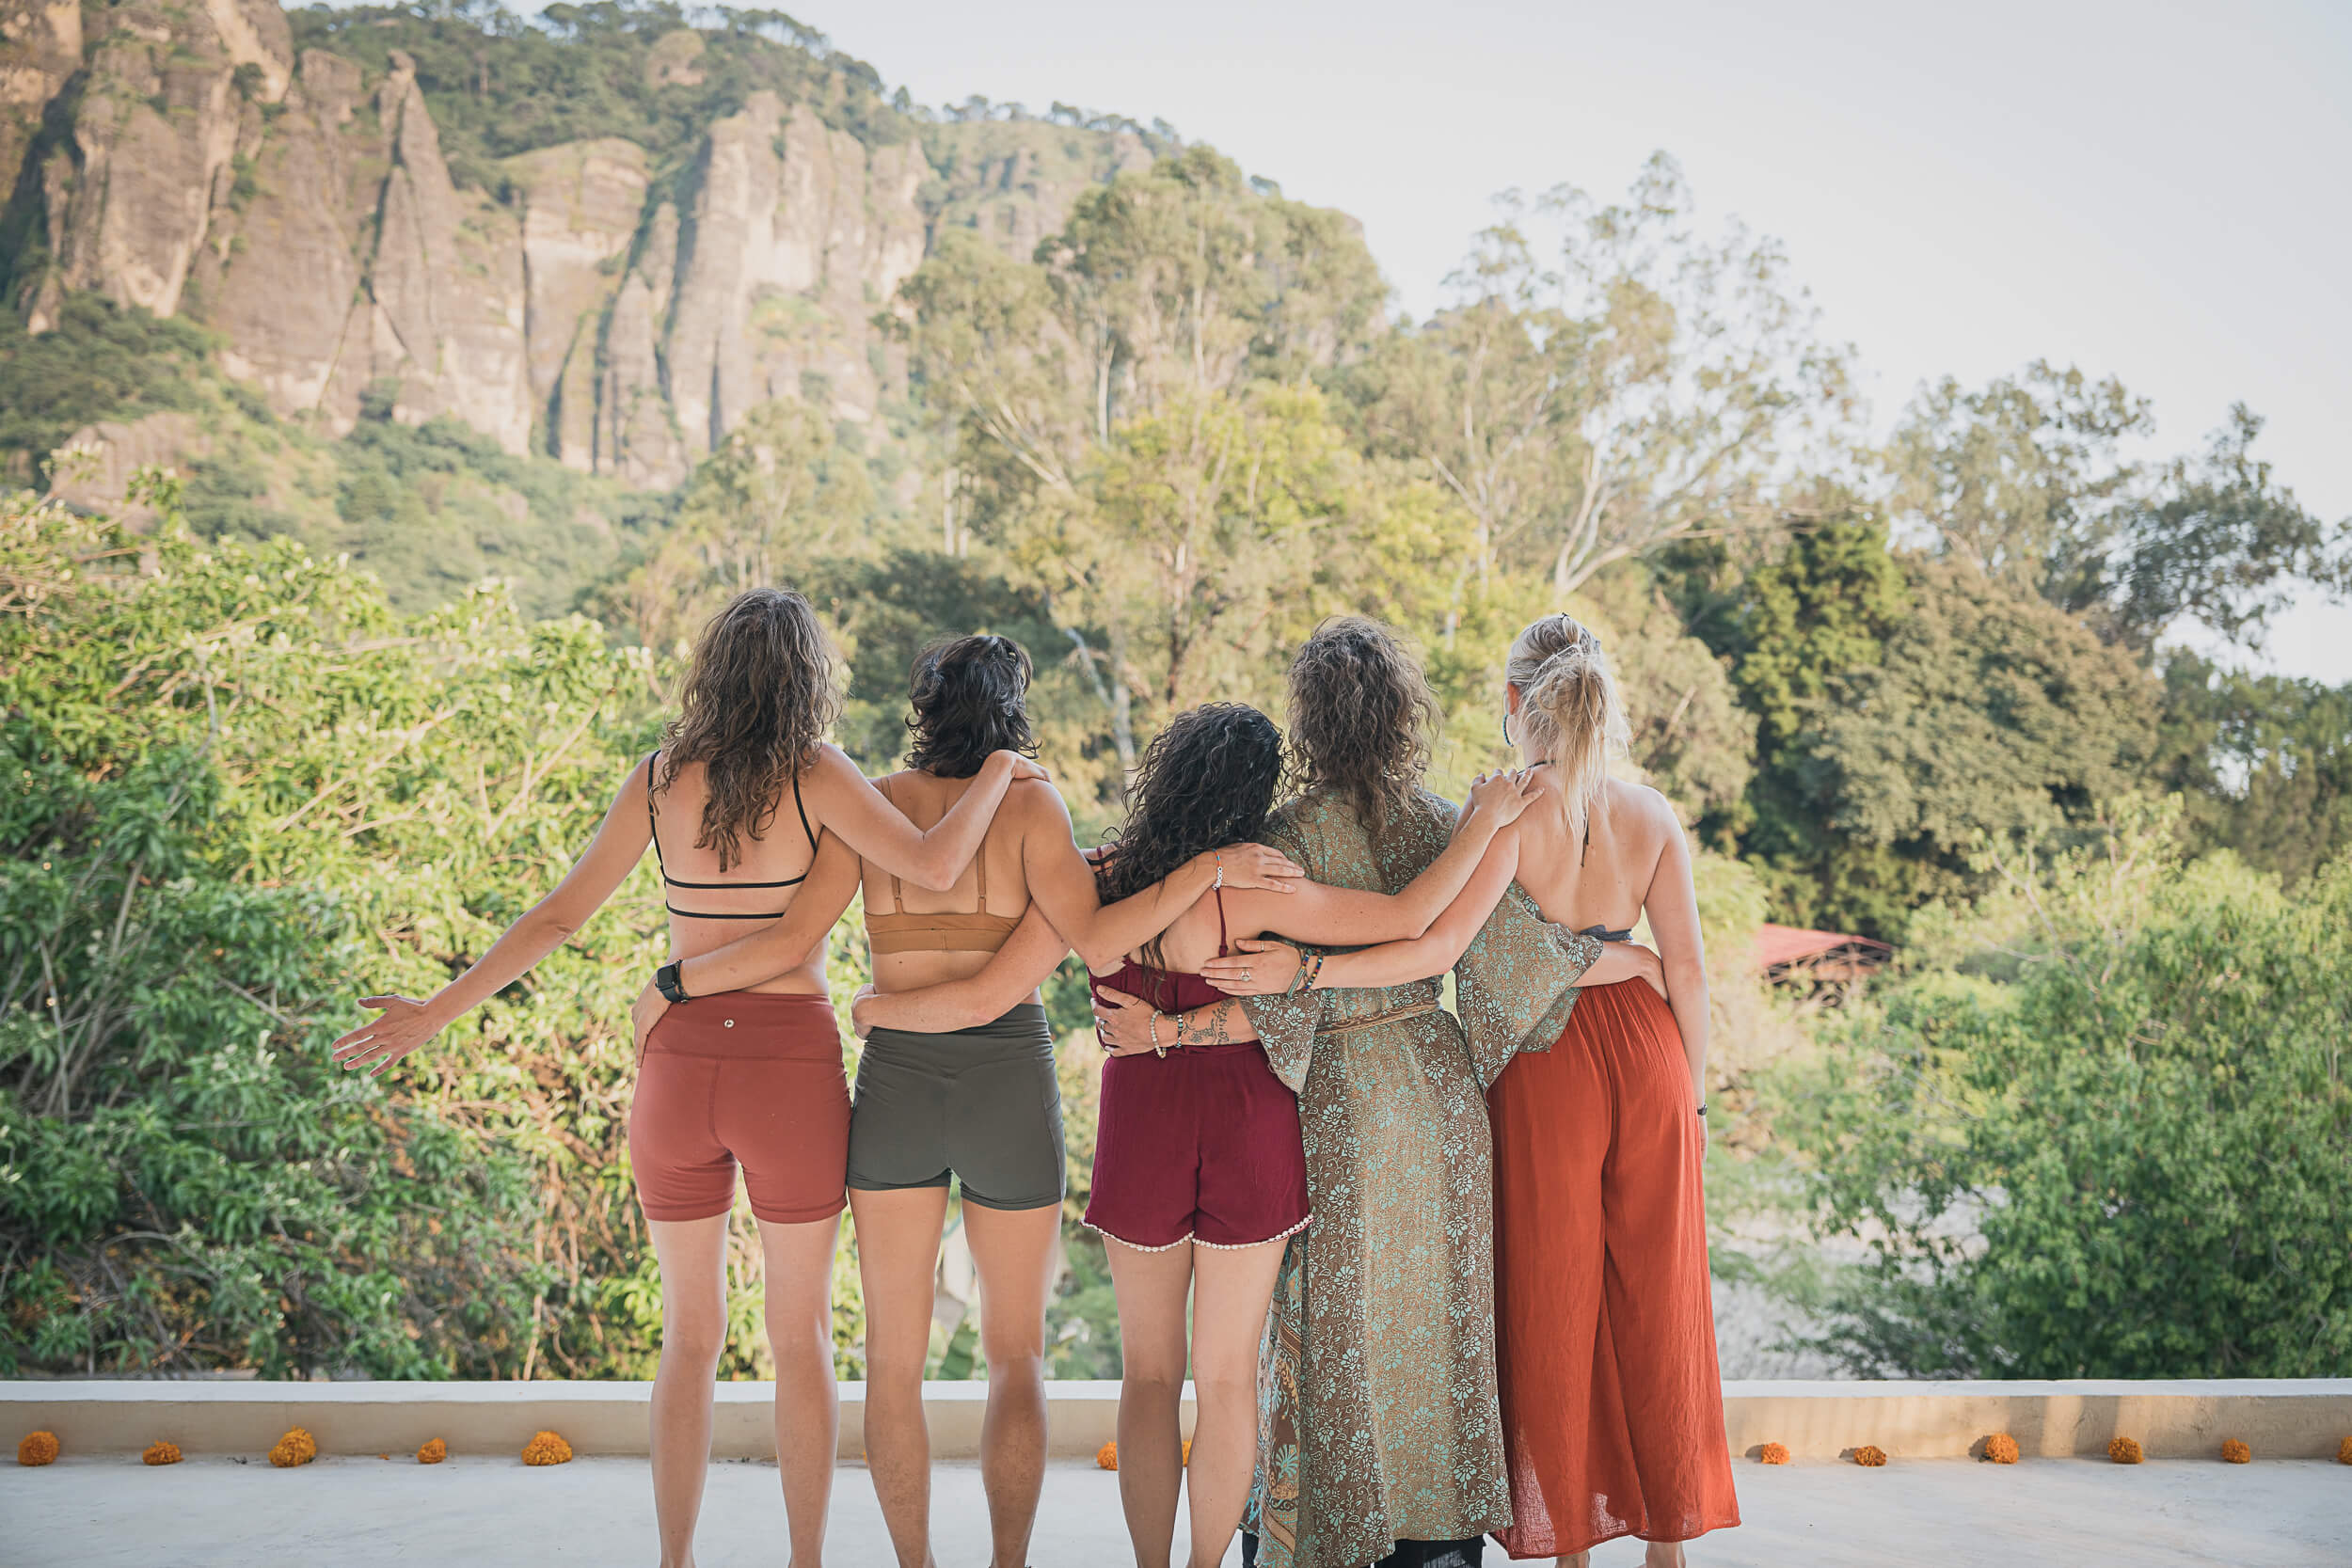 A group of retreat attendees embracing and looking out at a scenic view of towering cliffs and verdant forest, capturing the essence of camaraderie and nature's beauty in lifestyle photography by Matt Anthony Photography.